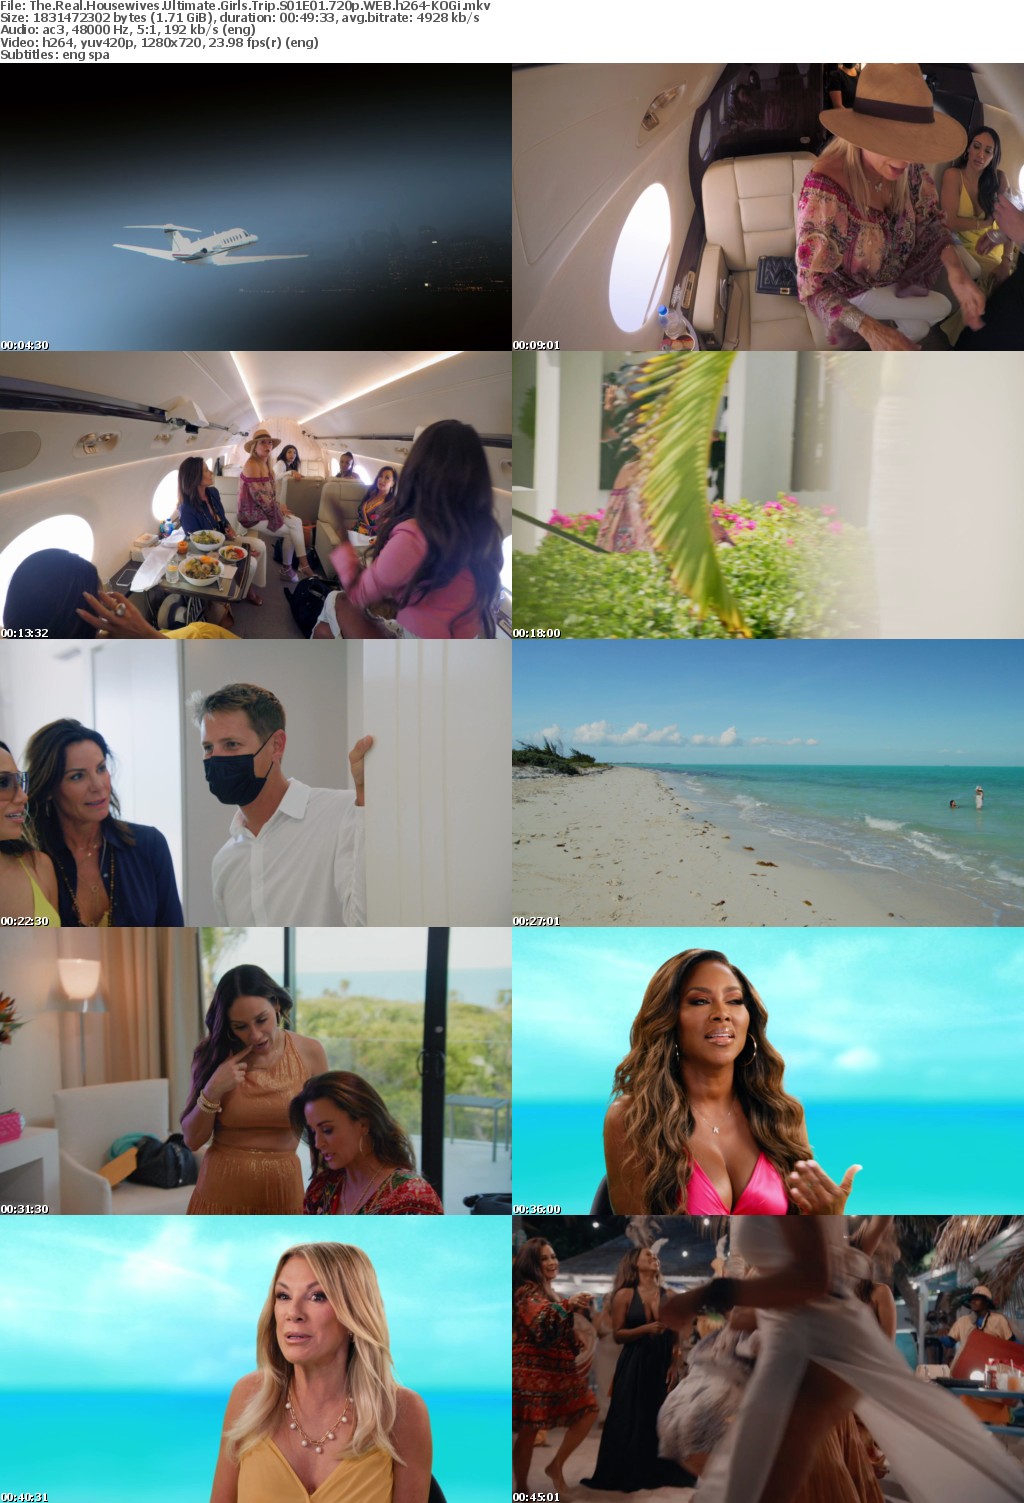 The Real Housewives Ultimate Girls Trip S01E01 720p WEB h264-KOGi